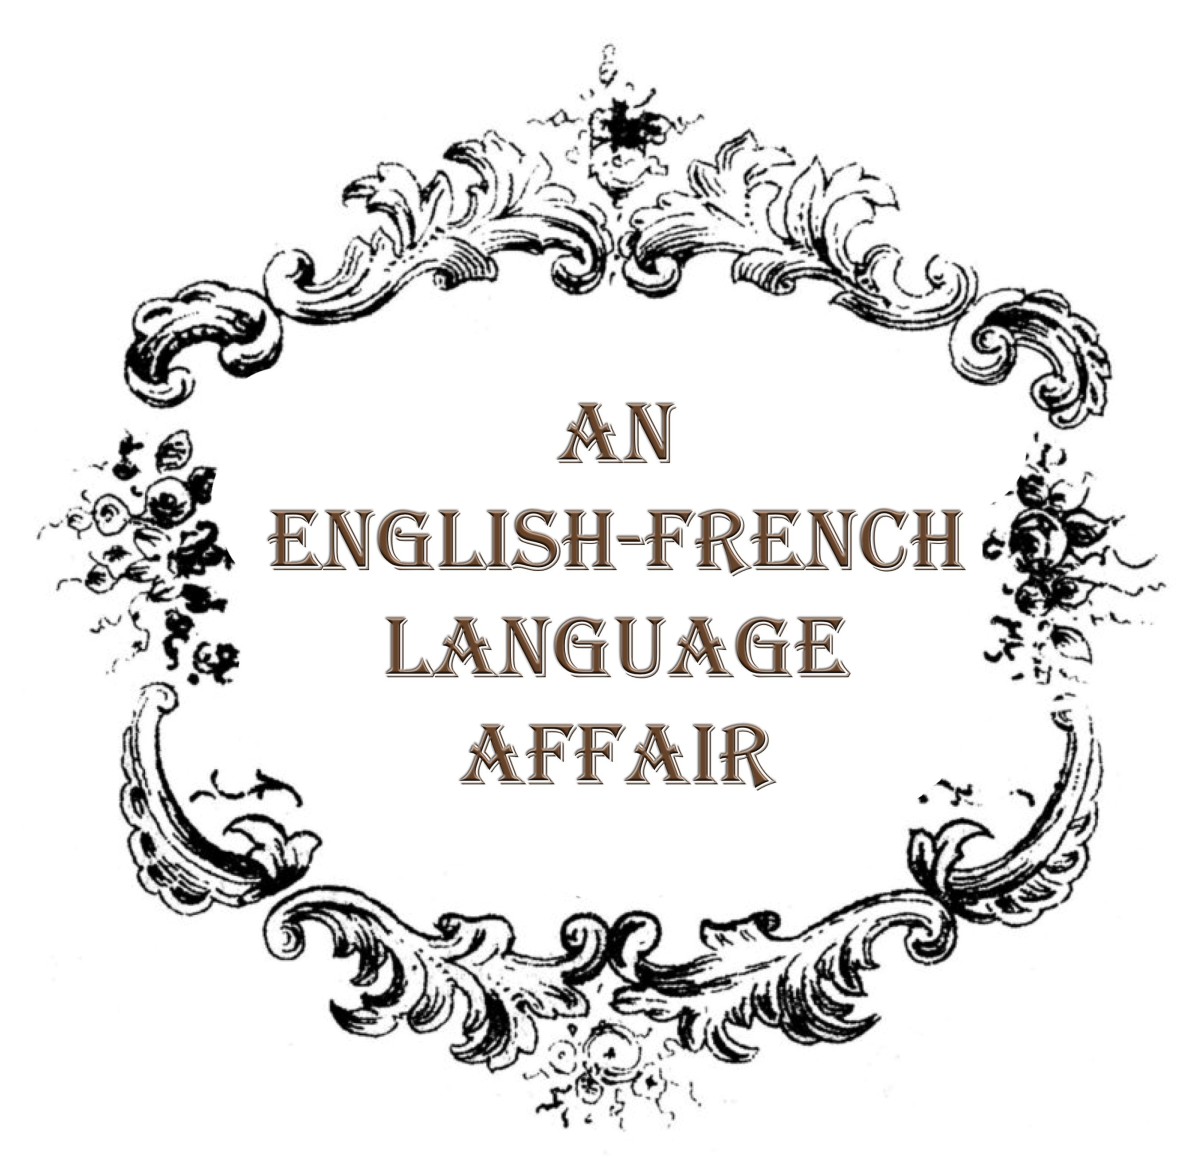 An English-French connection